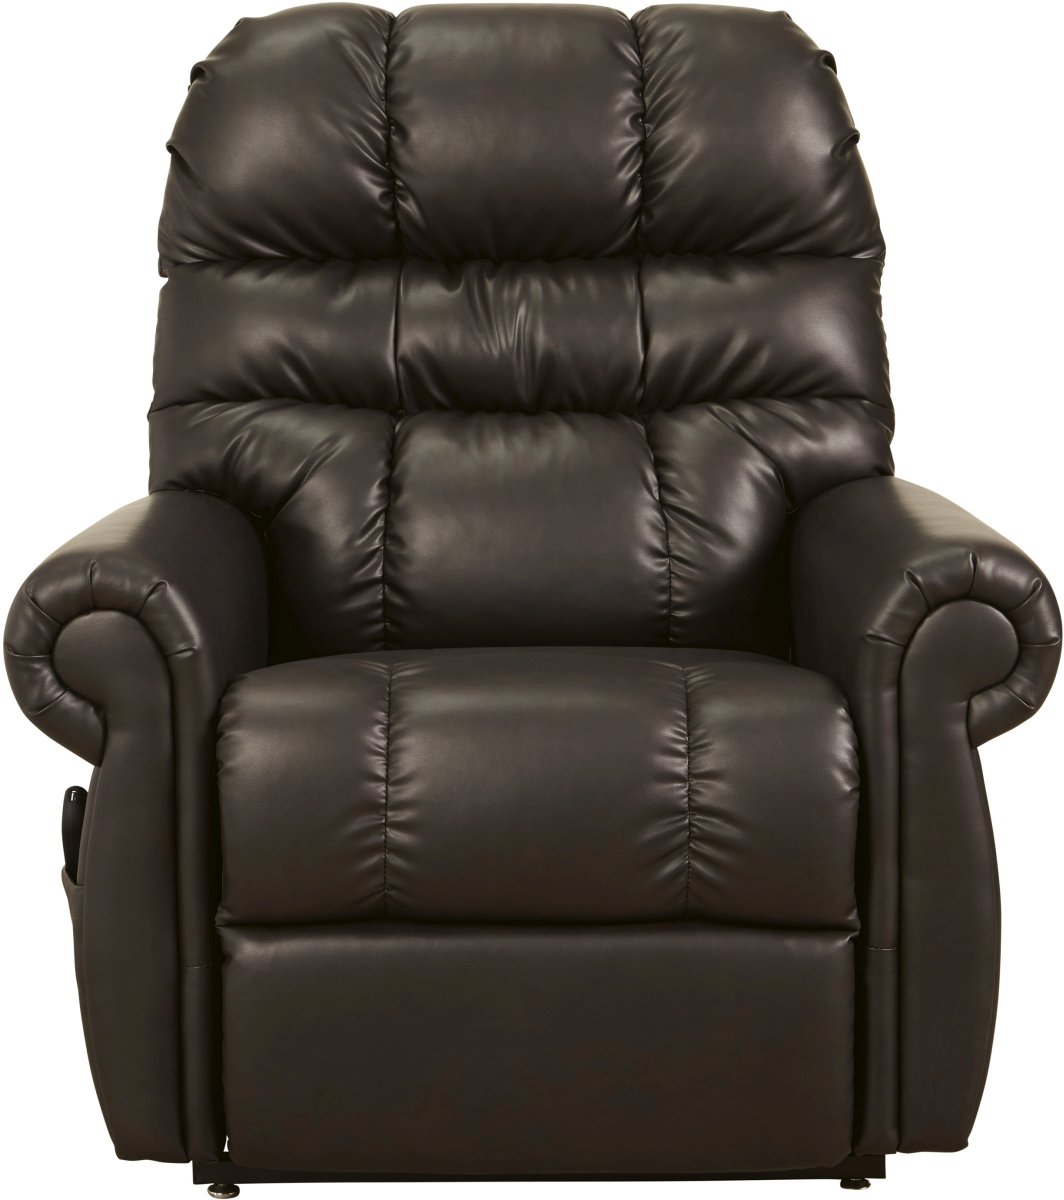 Signature Design by Ashley® Mopton Chocolate Power Lift Recliner